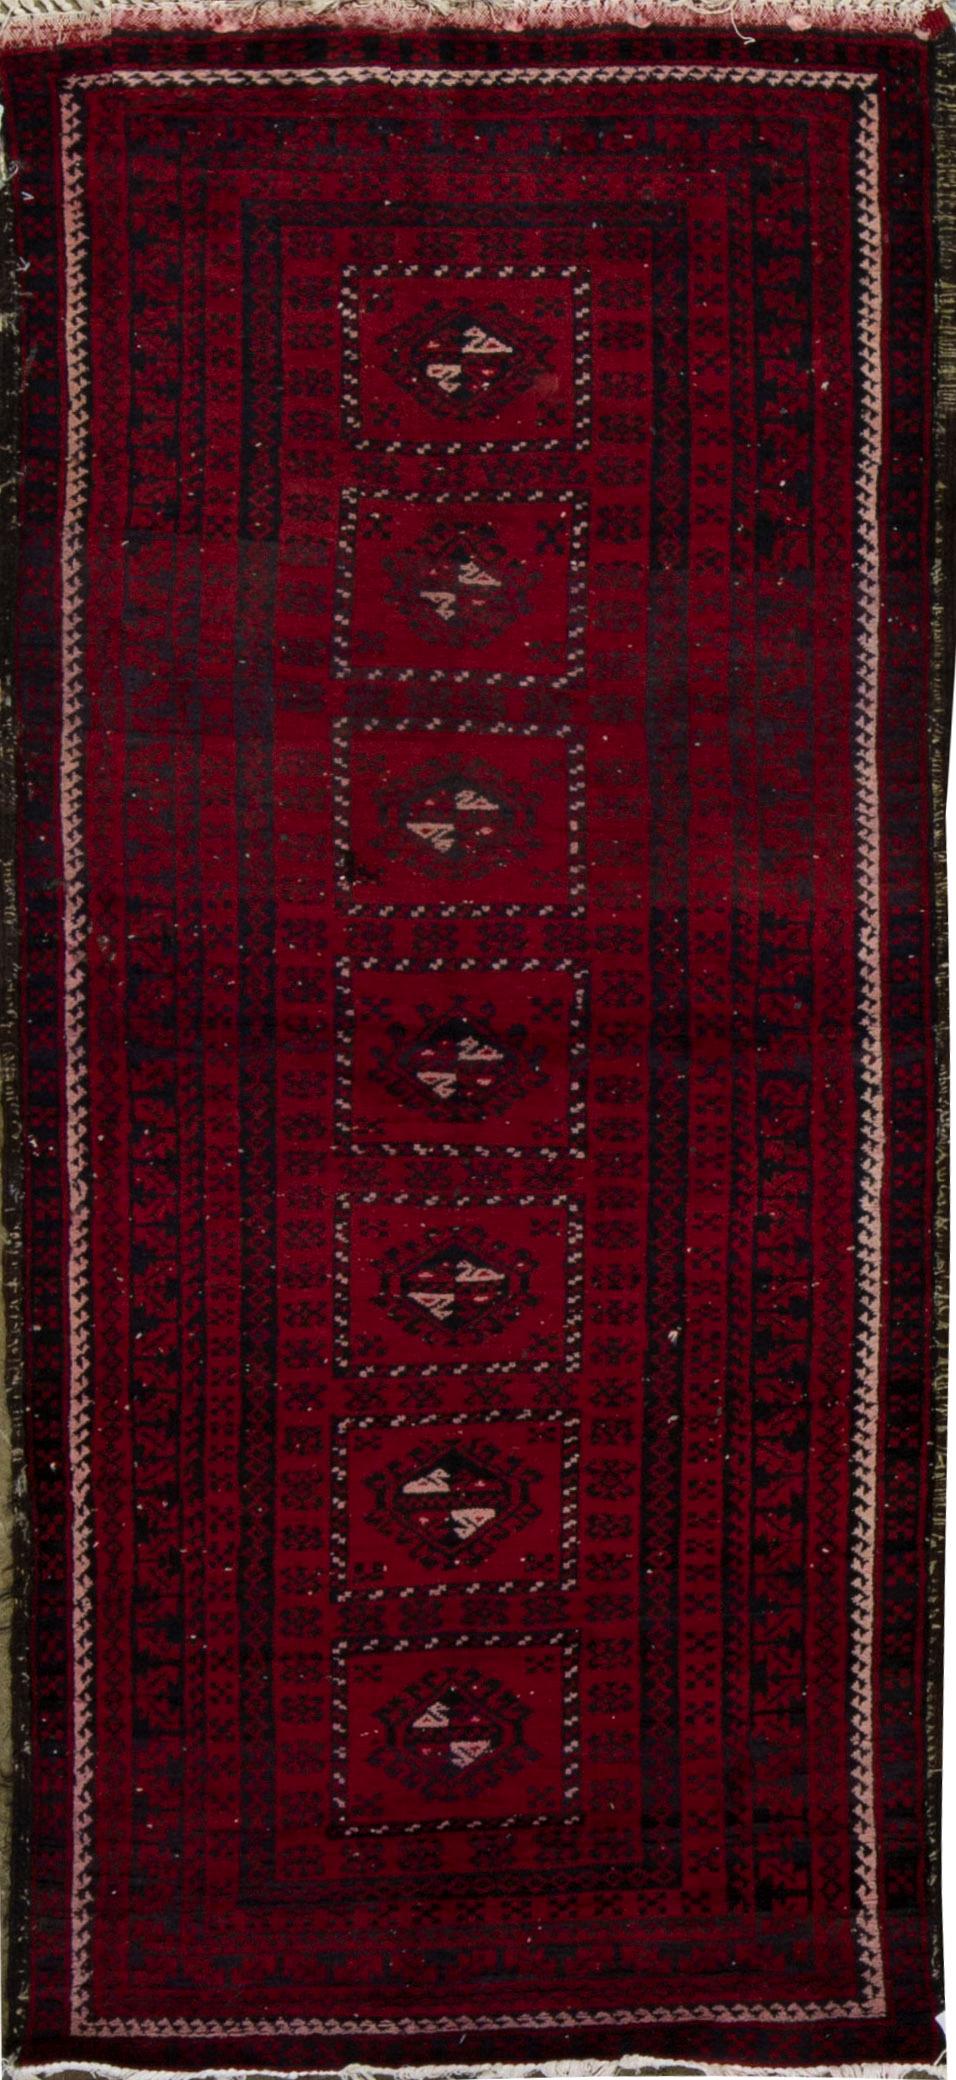 Contemporary Afghan Balouch Traditional Handwoven Rug 3'1 x 7' For Sale